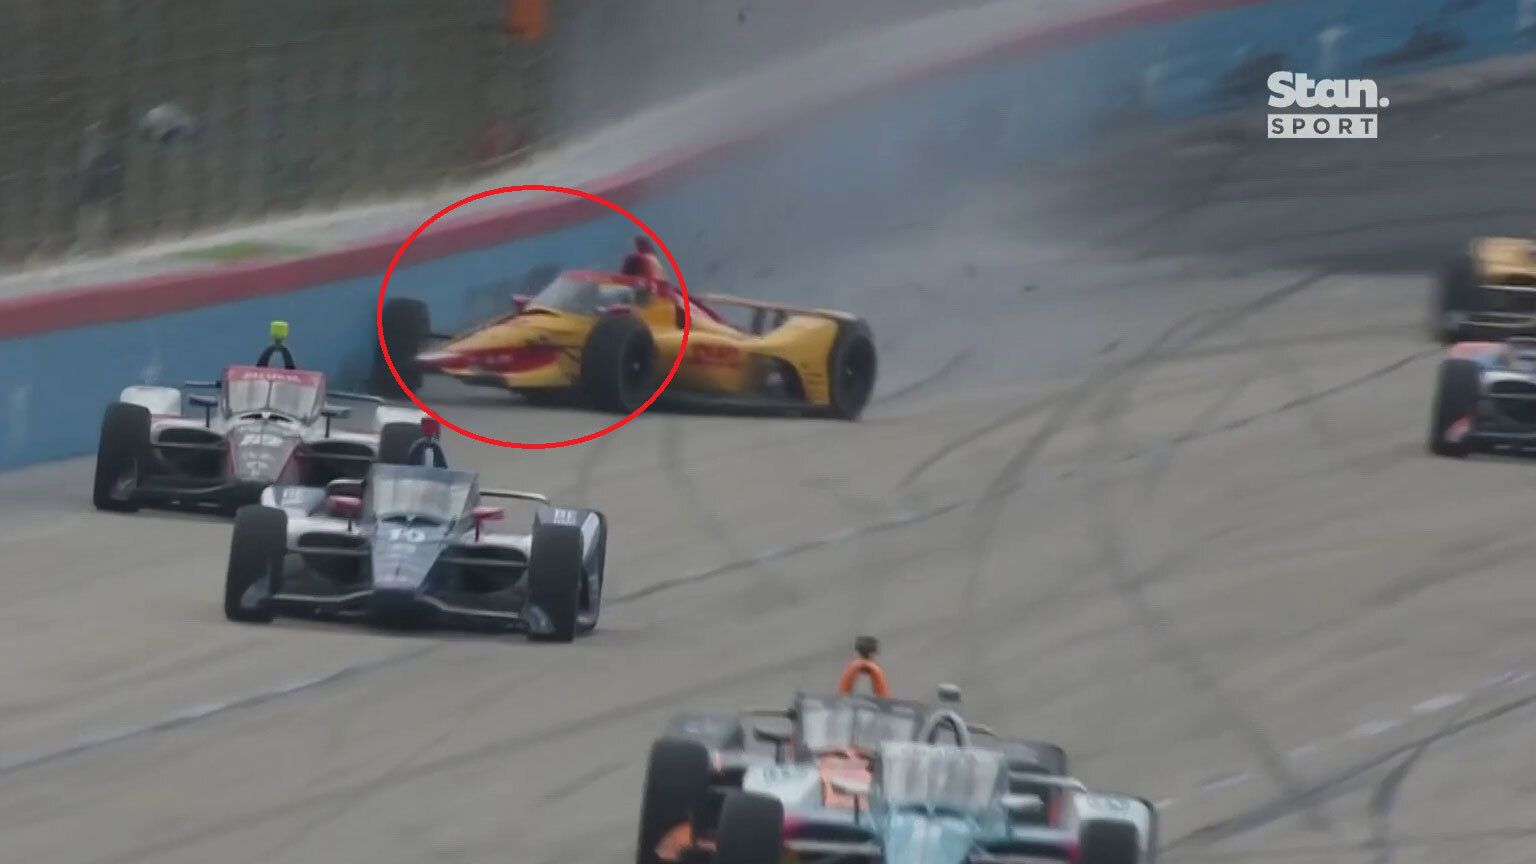 Romain Grosjean hits the wall on the penultimate lap of the IndyCar race at Texas Motor Speedway.